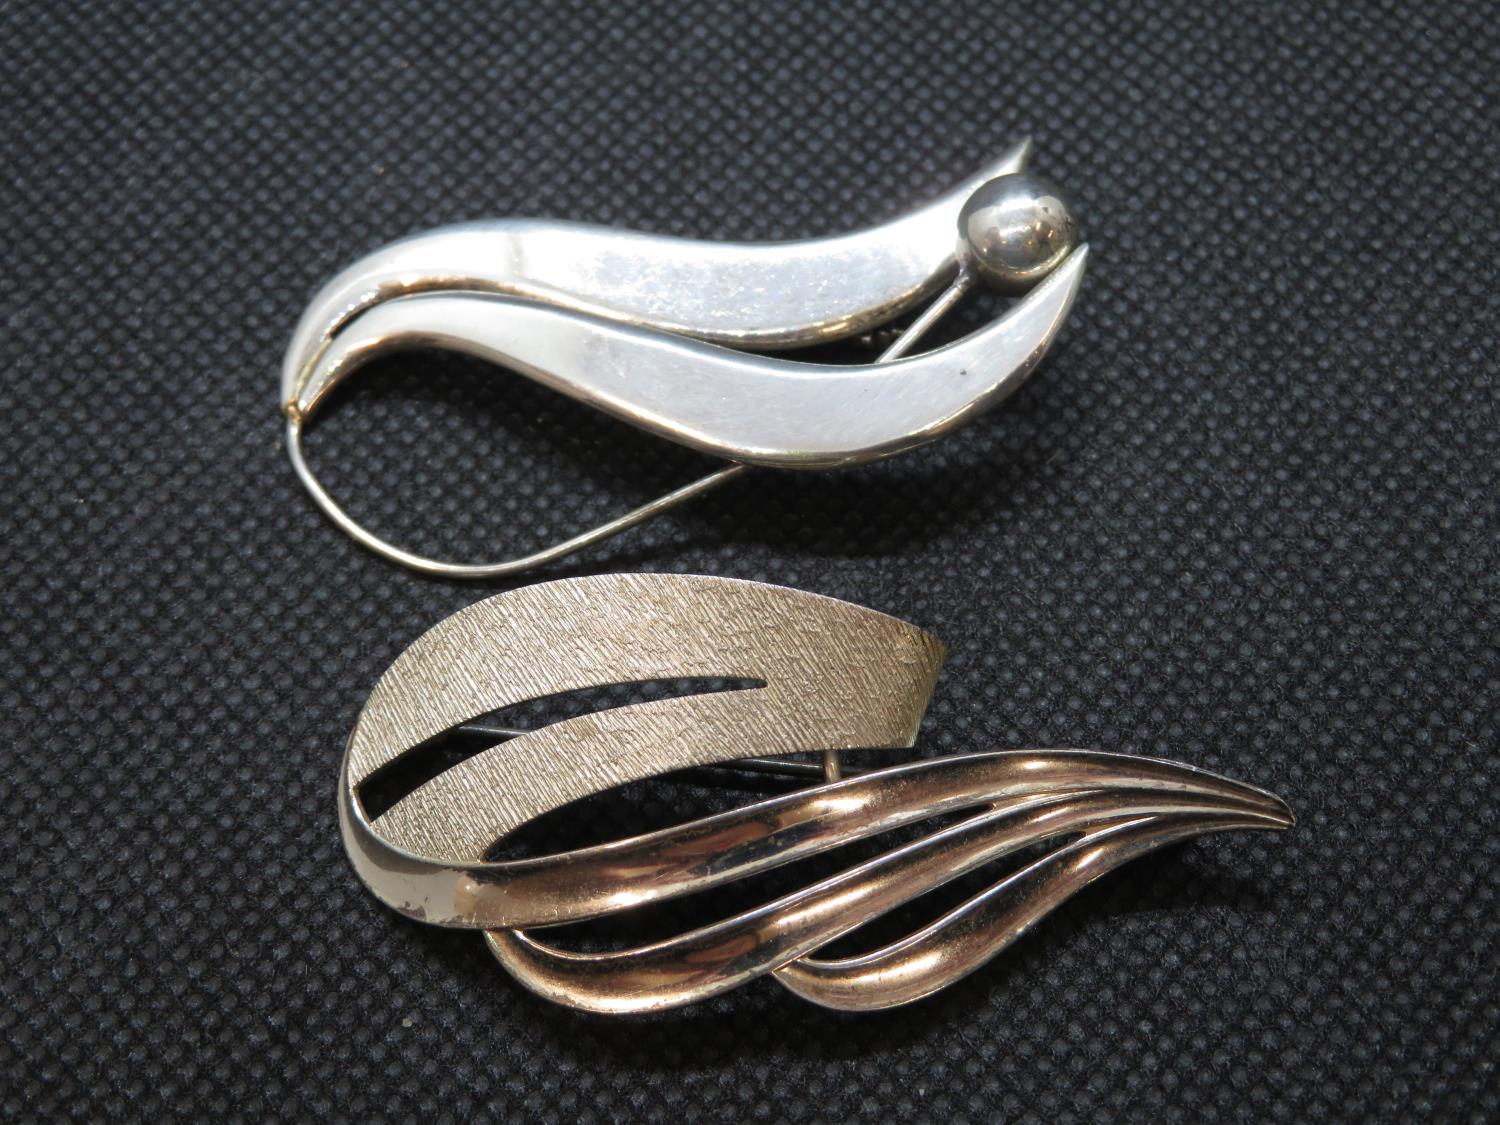 2x modernist silver brooches both HM 18g